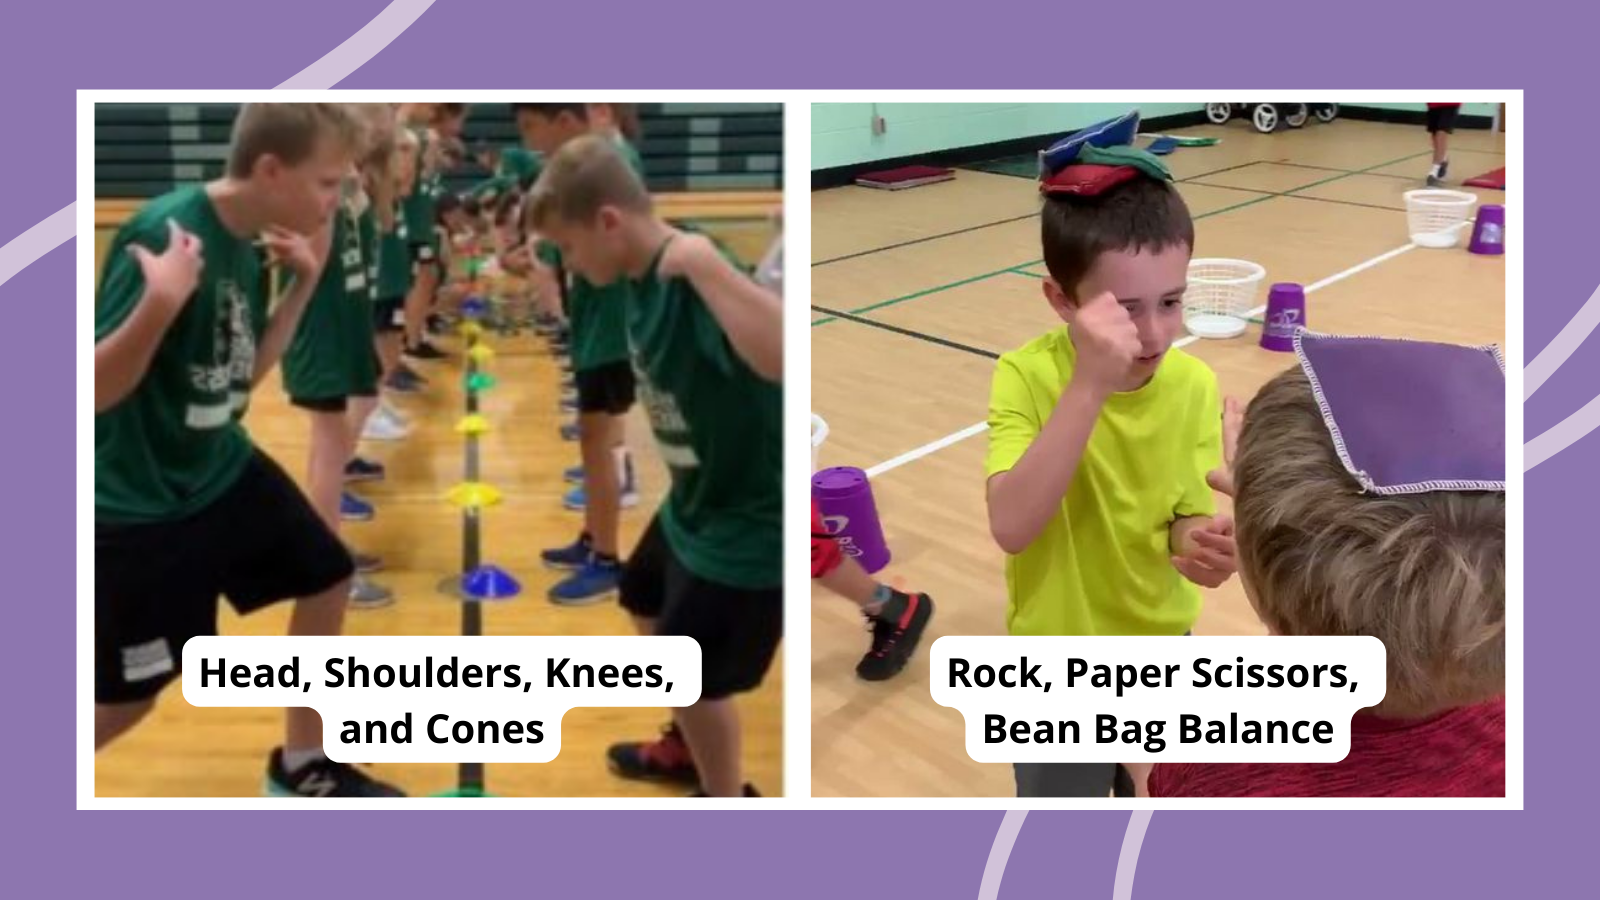 Kids playing elementary PE games like head, shoulders, knees, and cones and rock, paper, scissors, bean bag, balance